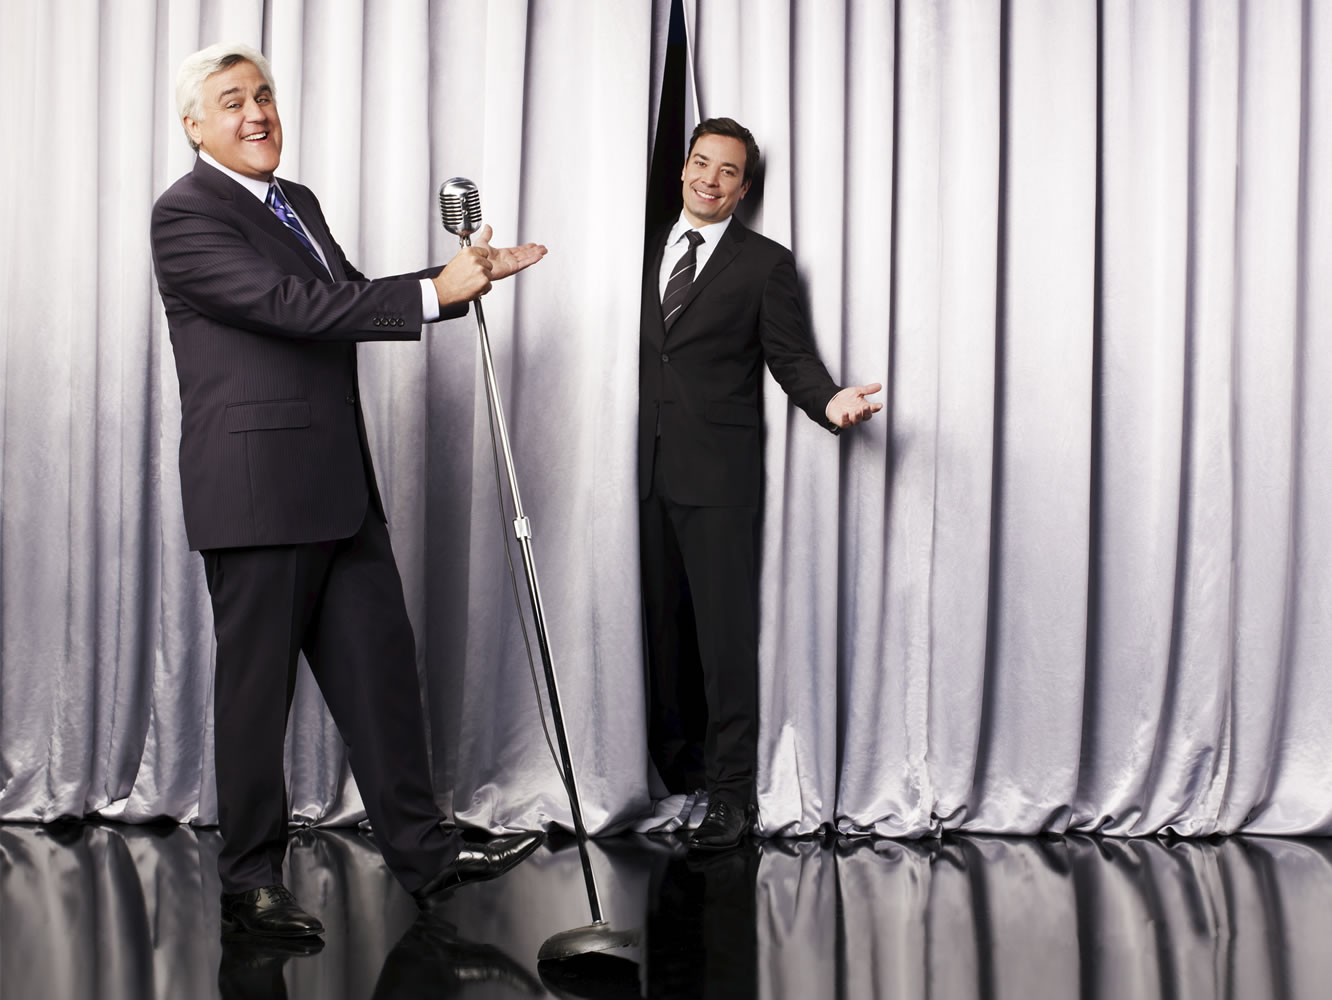 Jay Leno, host of &quot;The Tonight Show with Jay Leno,&quot; left, and Jimmy Fallon, host of &quot;Late Night with Jimmy Fallon,&quot; in Los Angeles.